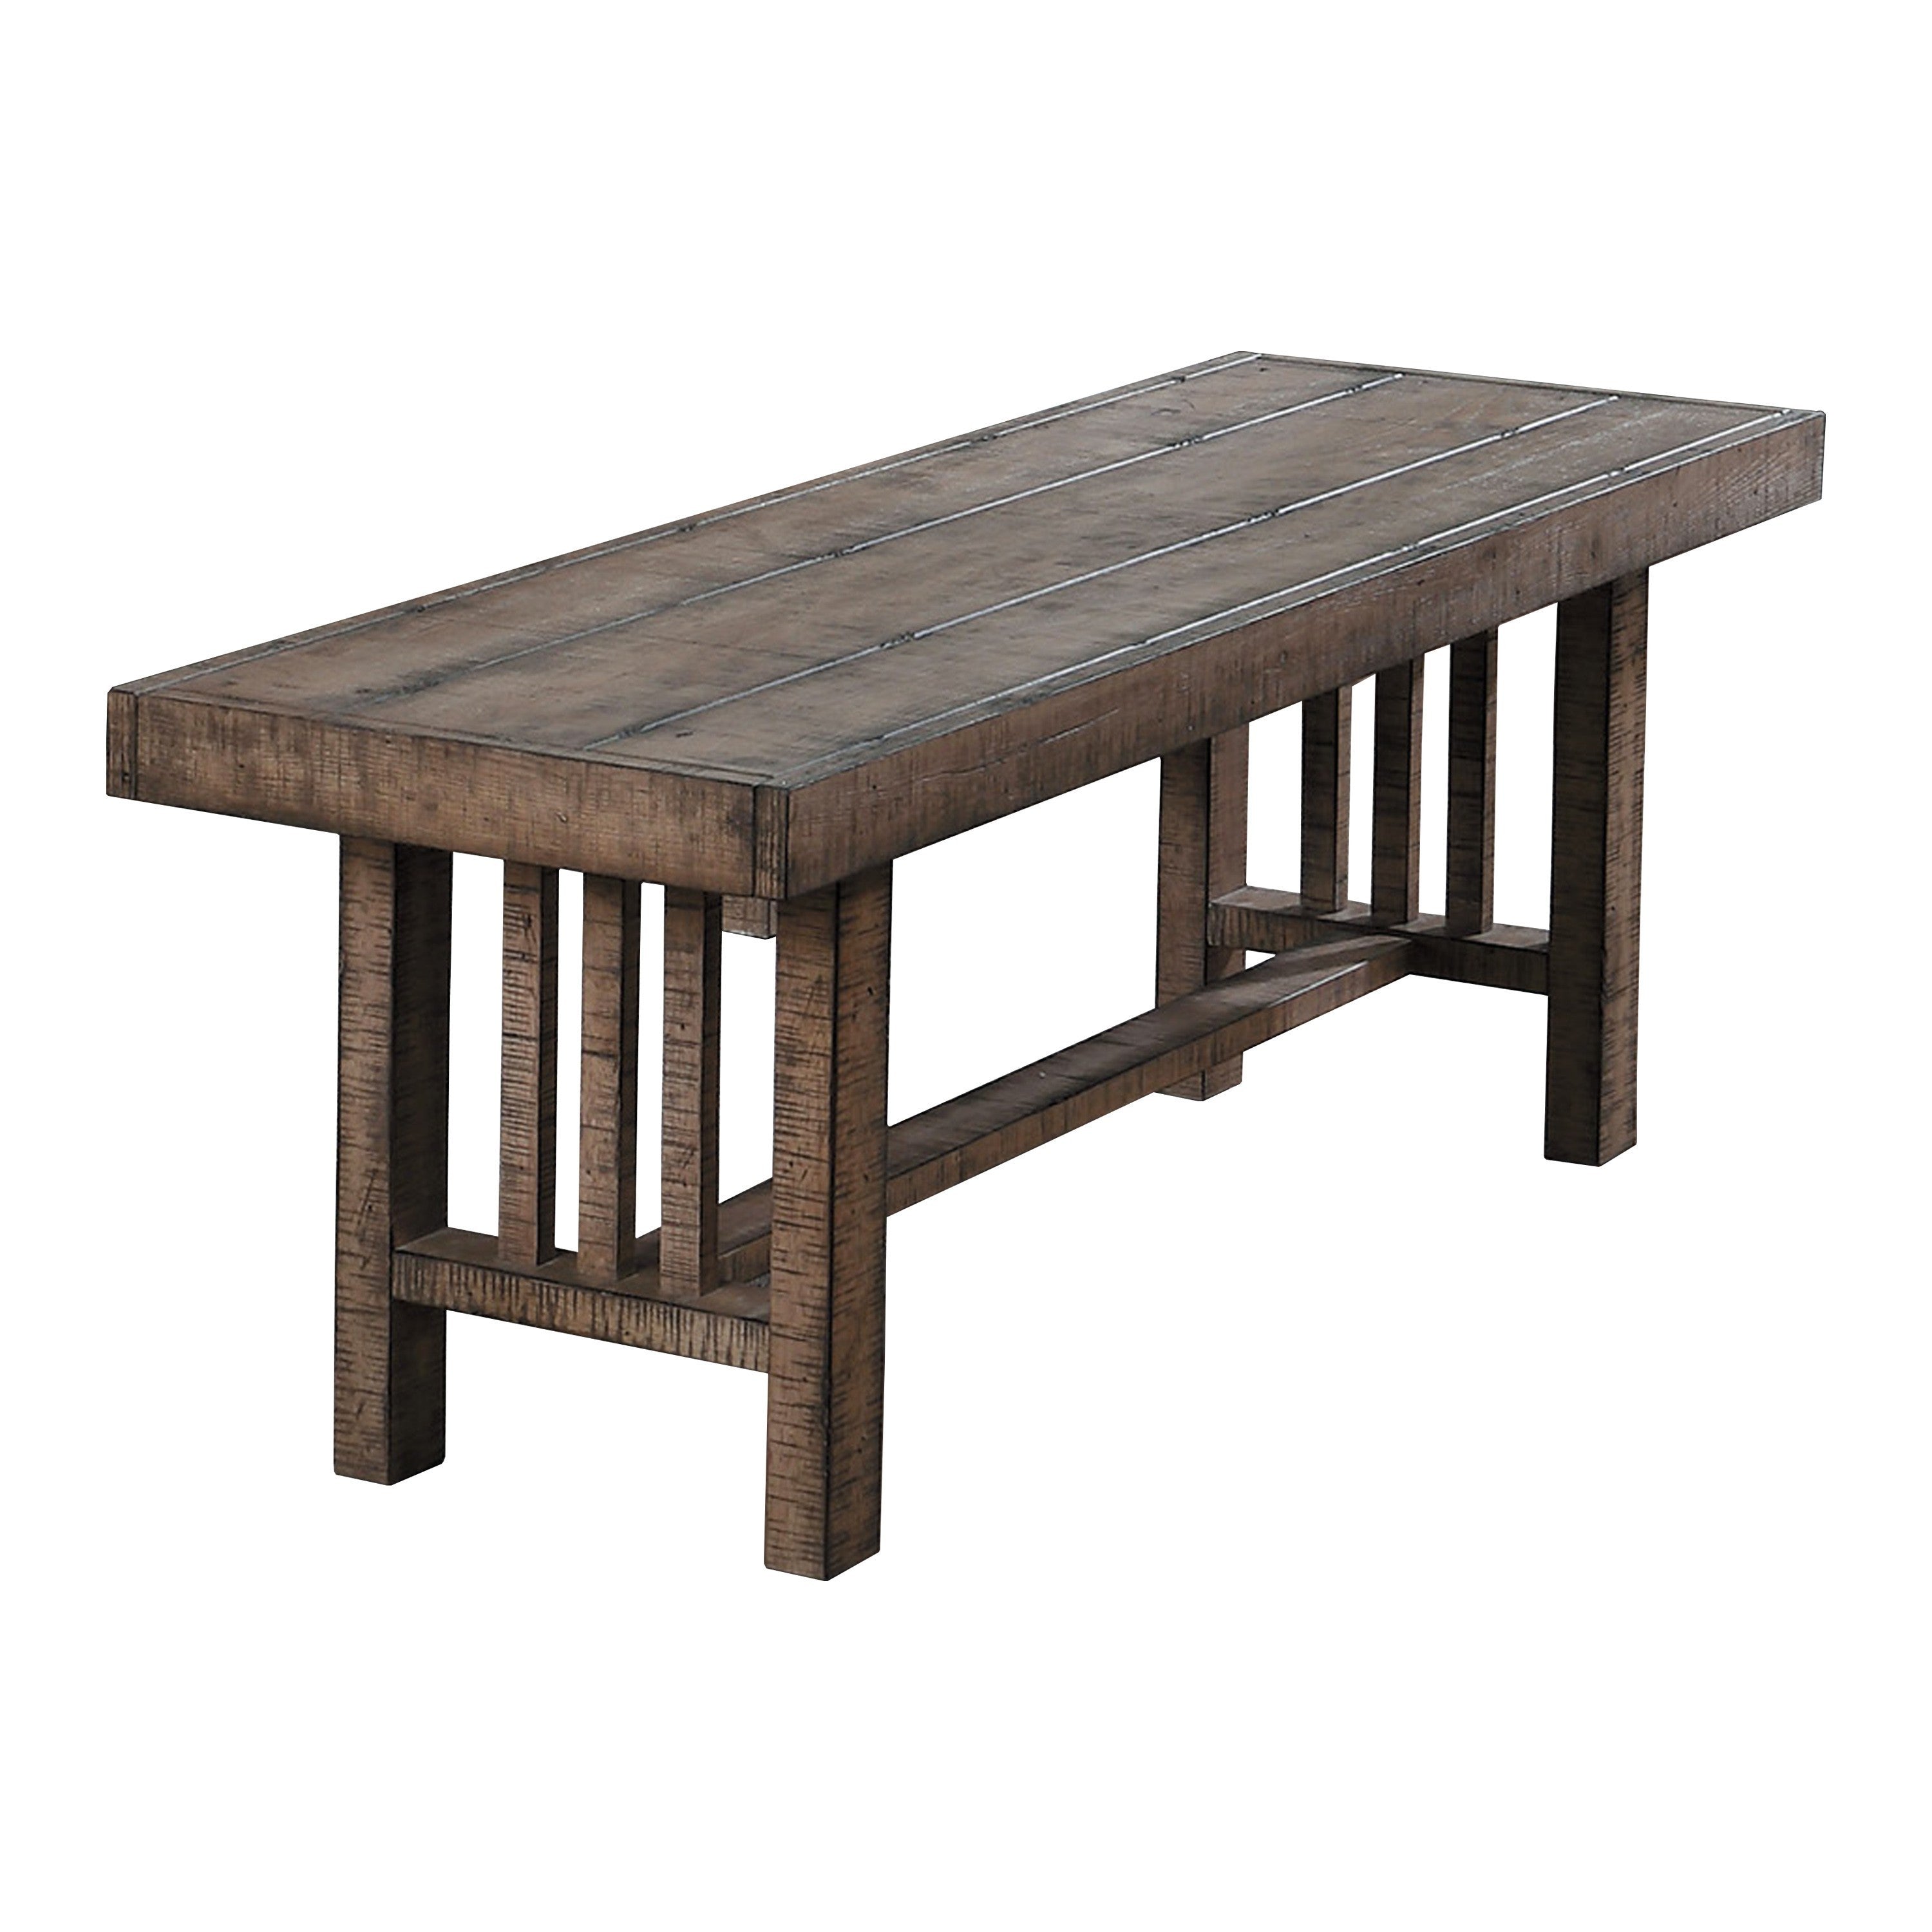 Rustic Design Bench Distressed Light Brown Finish Wooden Dining Furniture